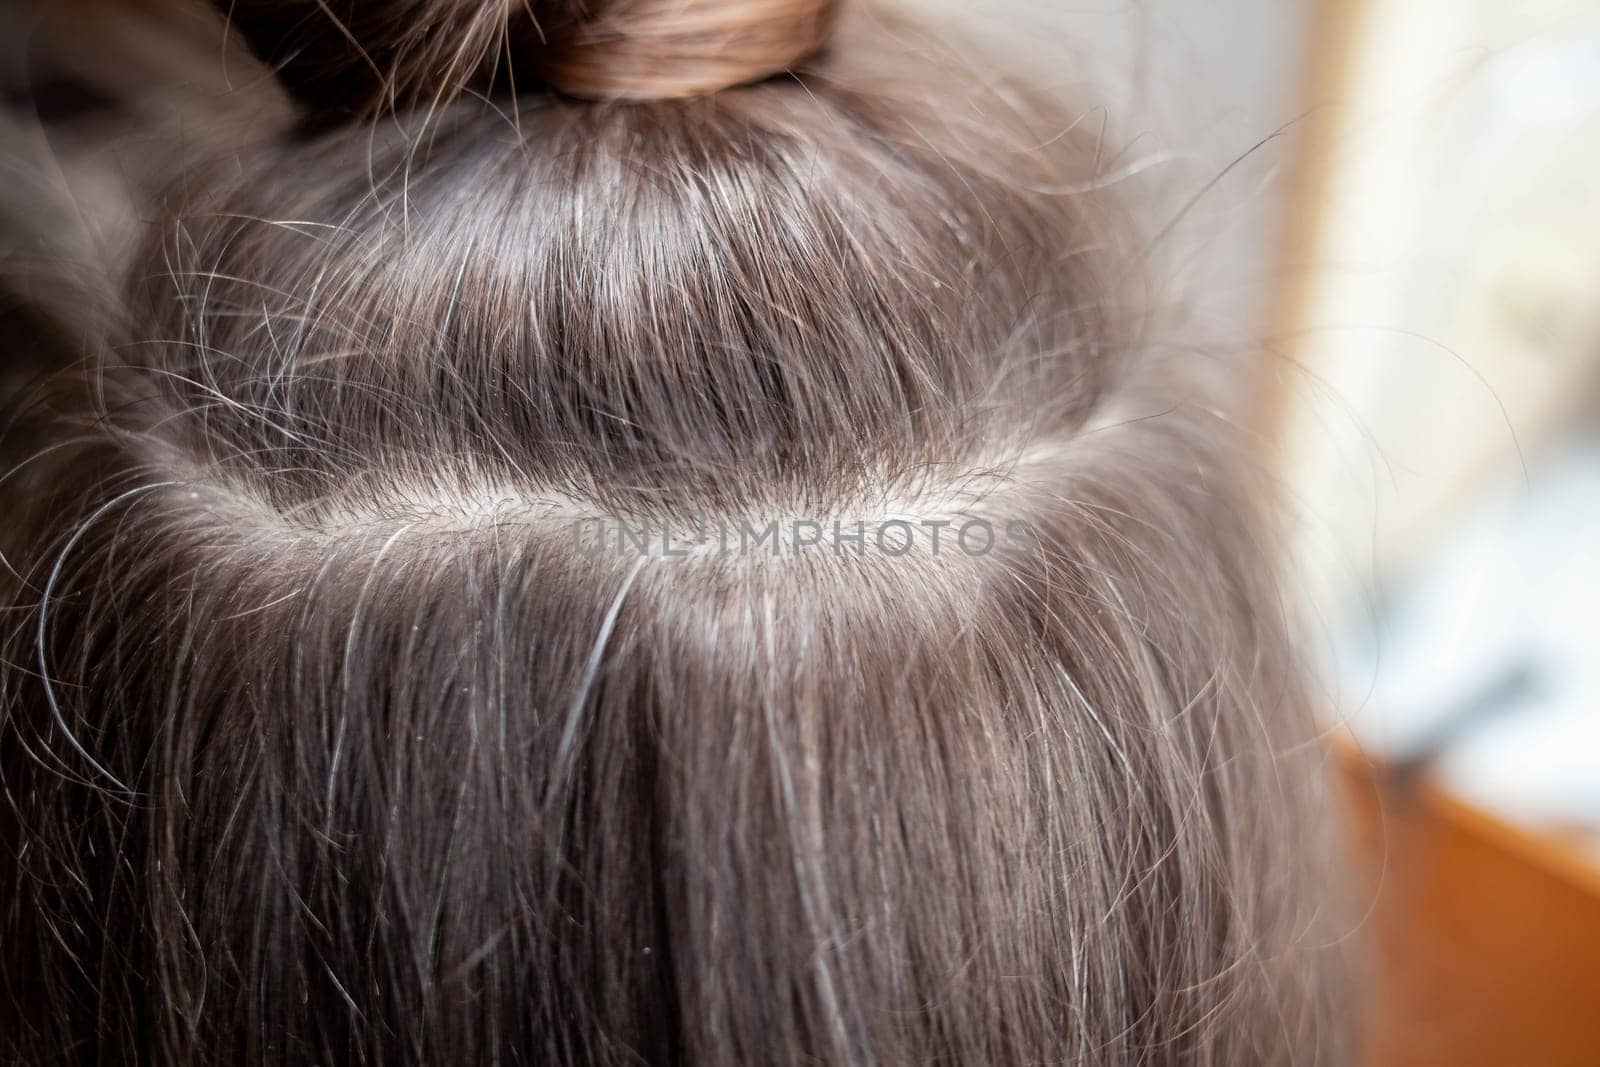 Hair ribbons for extensions on a woman's head at home. by AnatoliiFoto